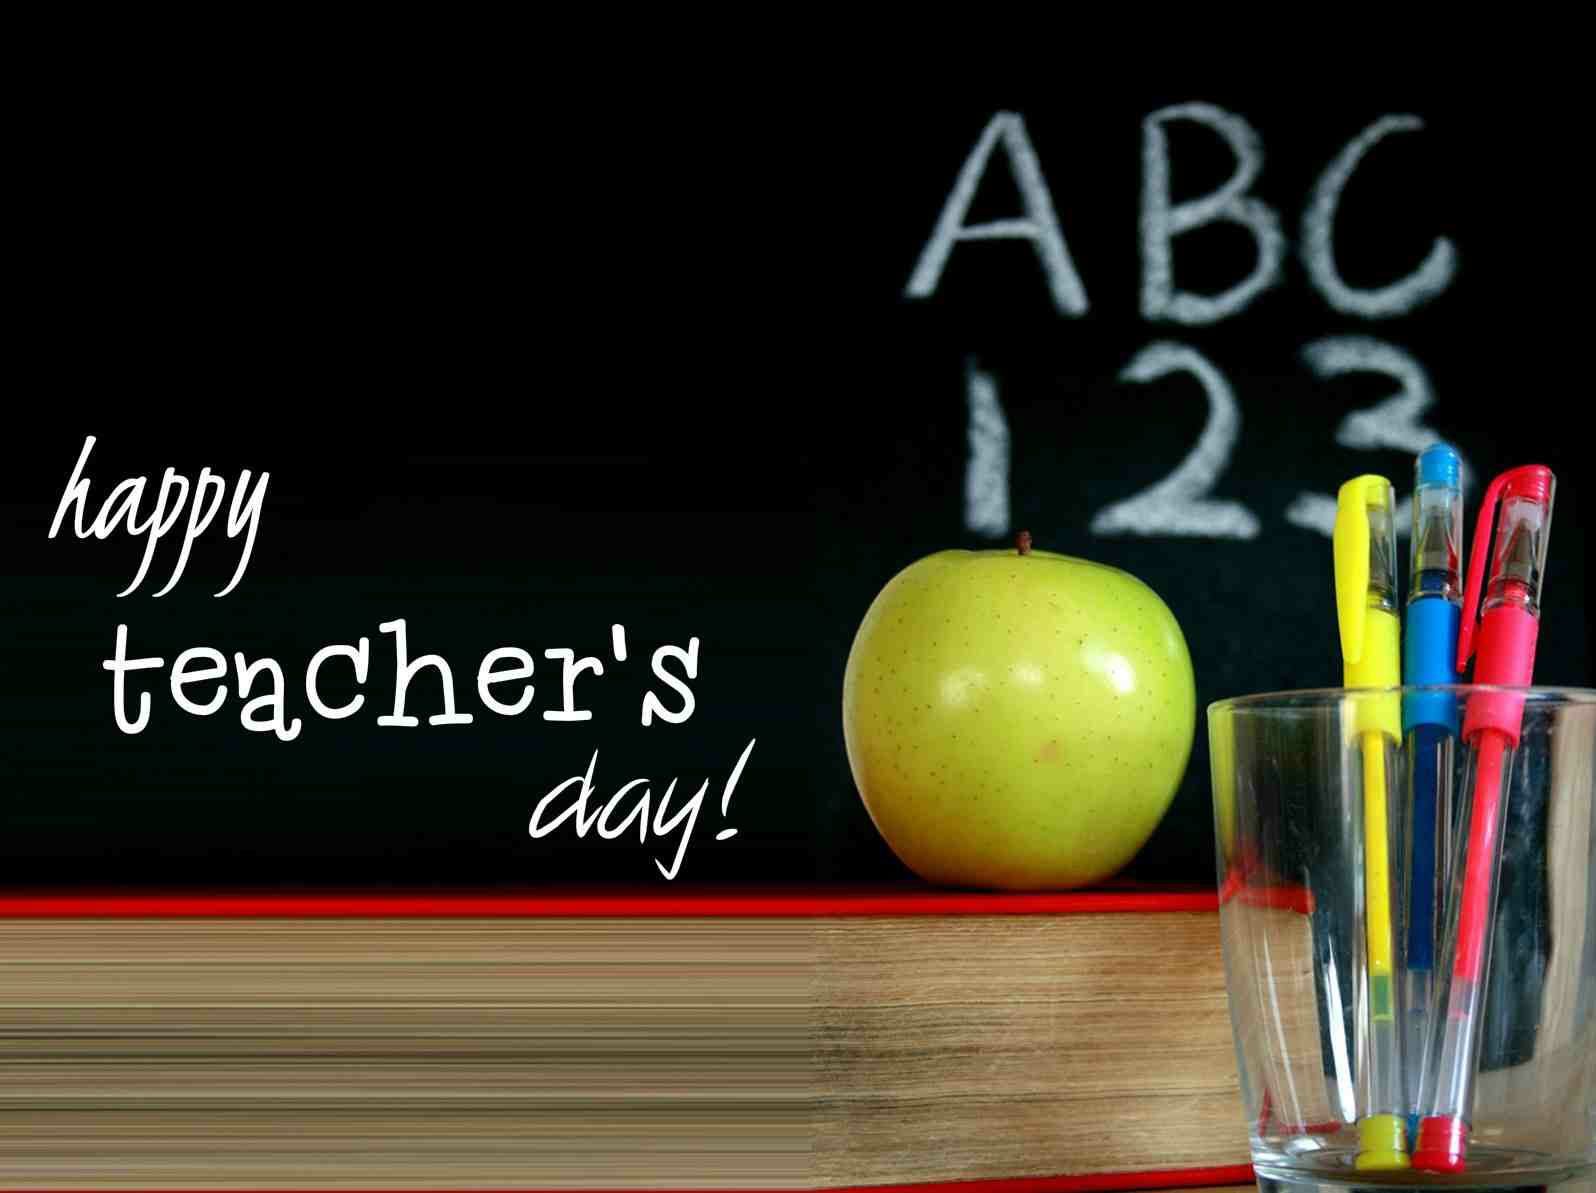 Happy World Teachers' Day  Apple On Book And Pens